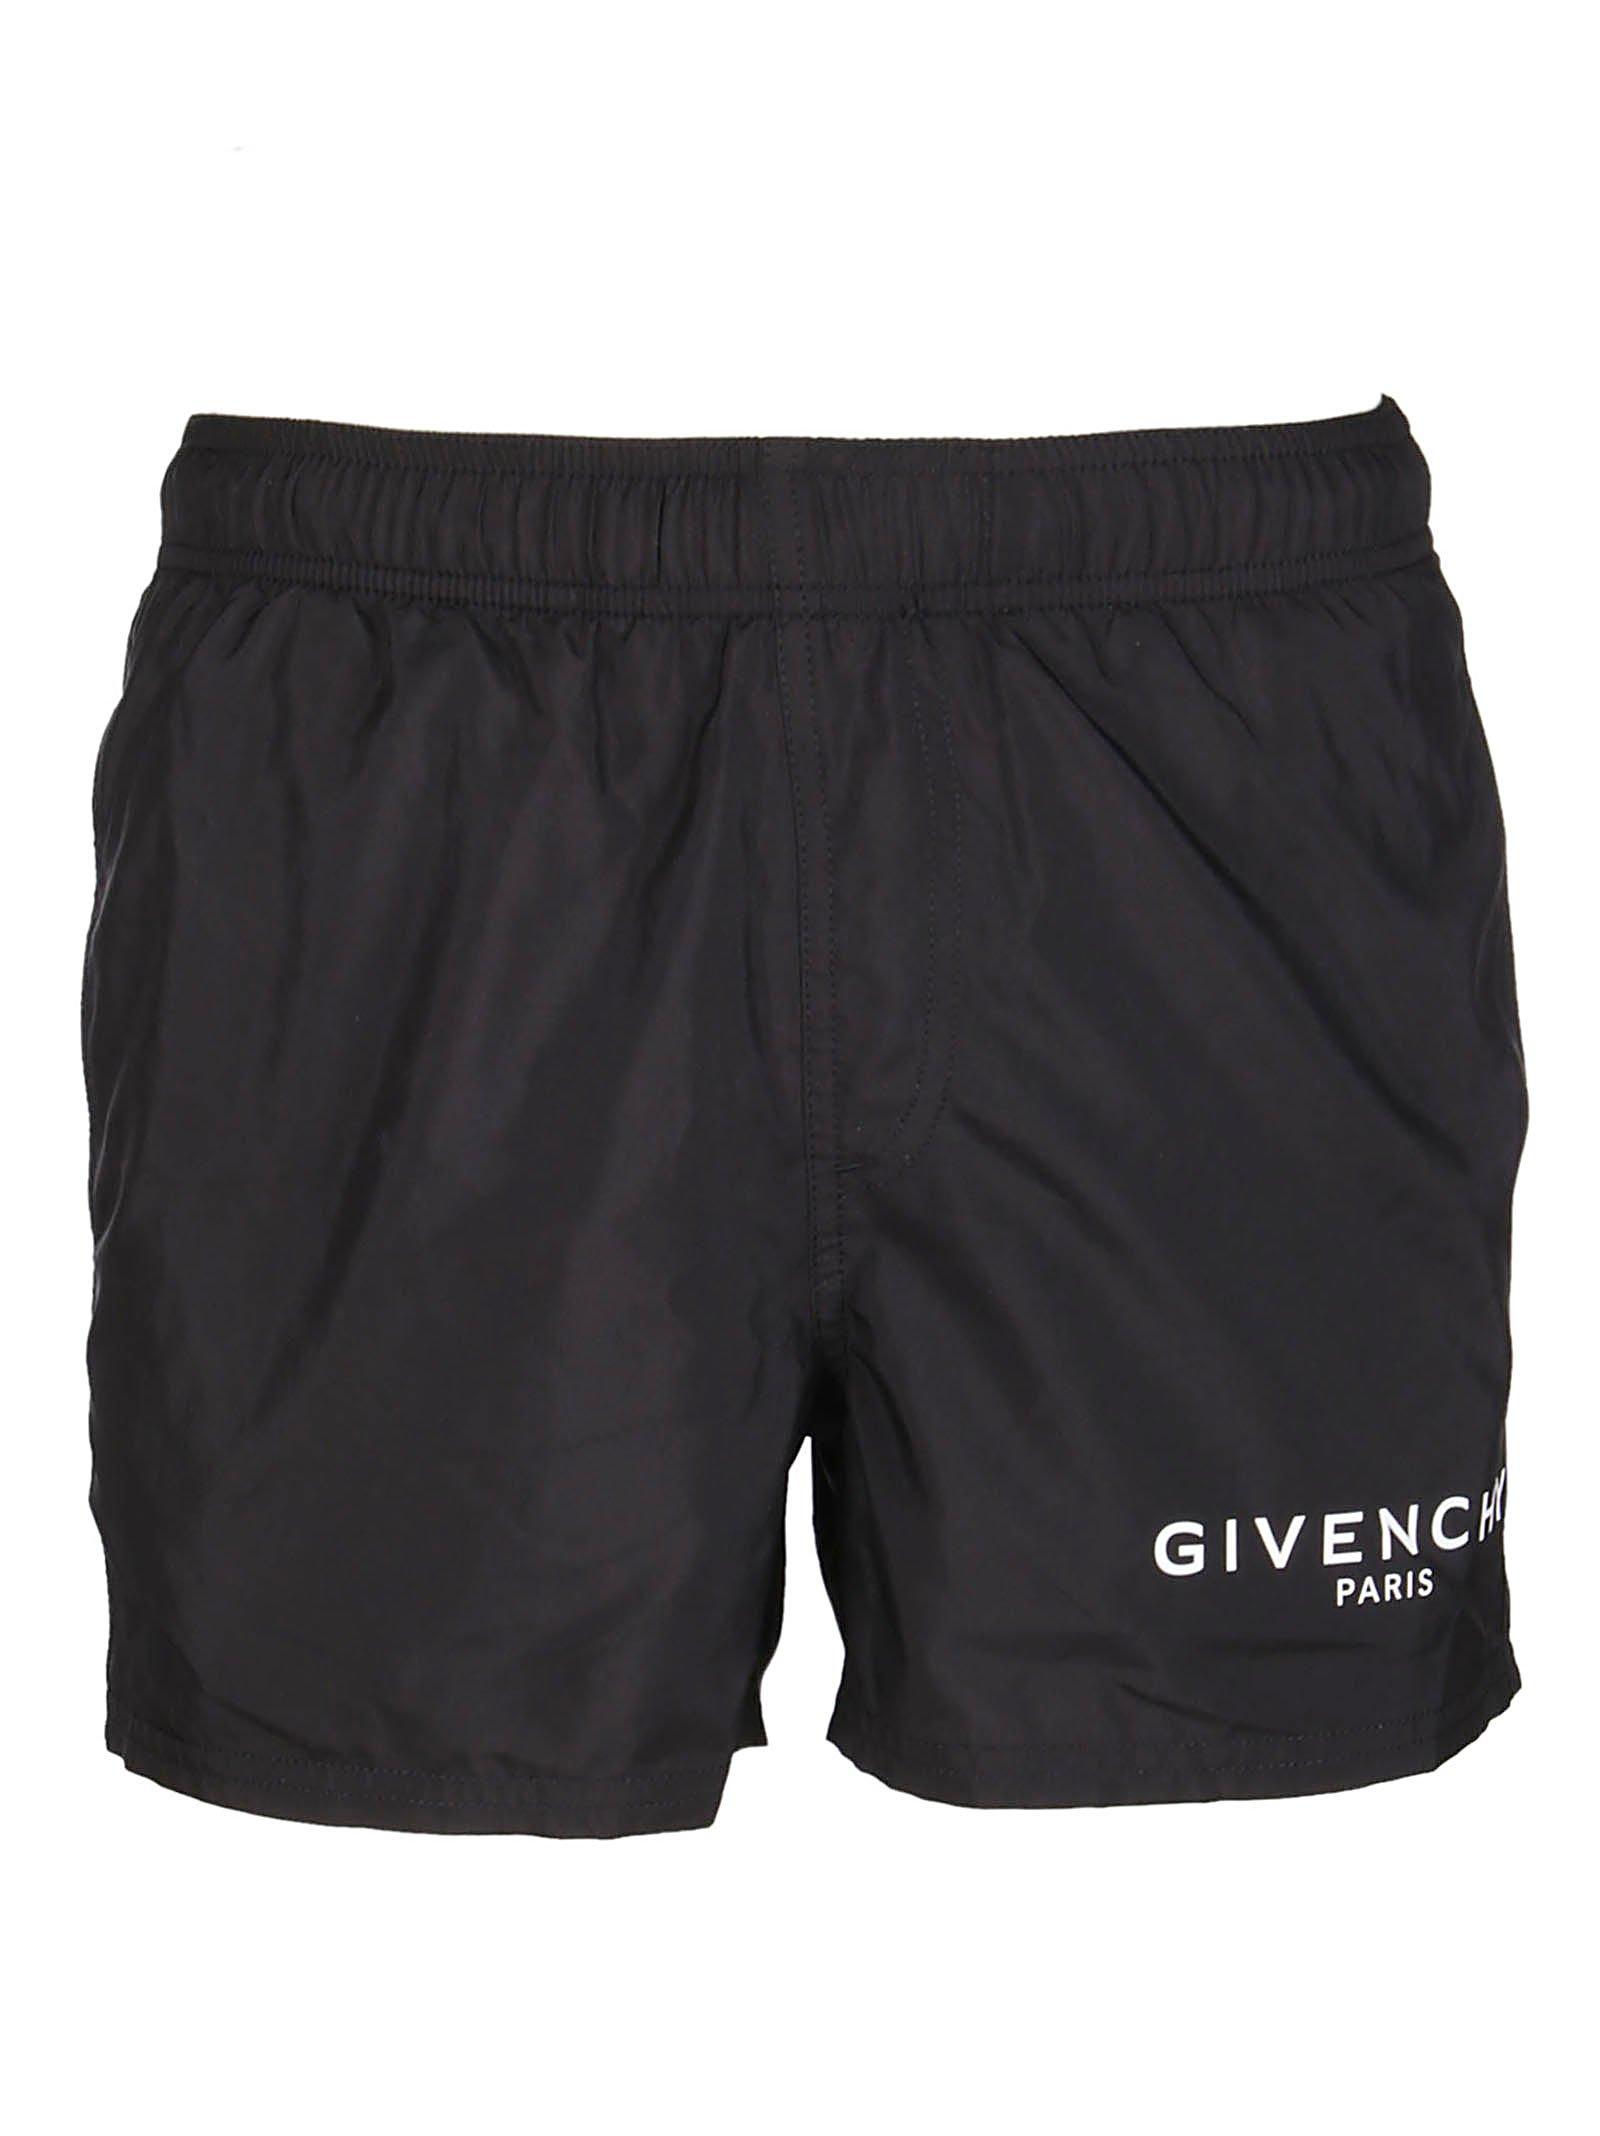 Givenchy Synthetic Logo Swim Shorts in Black for Men - Lyst